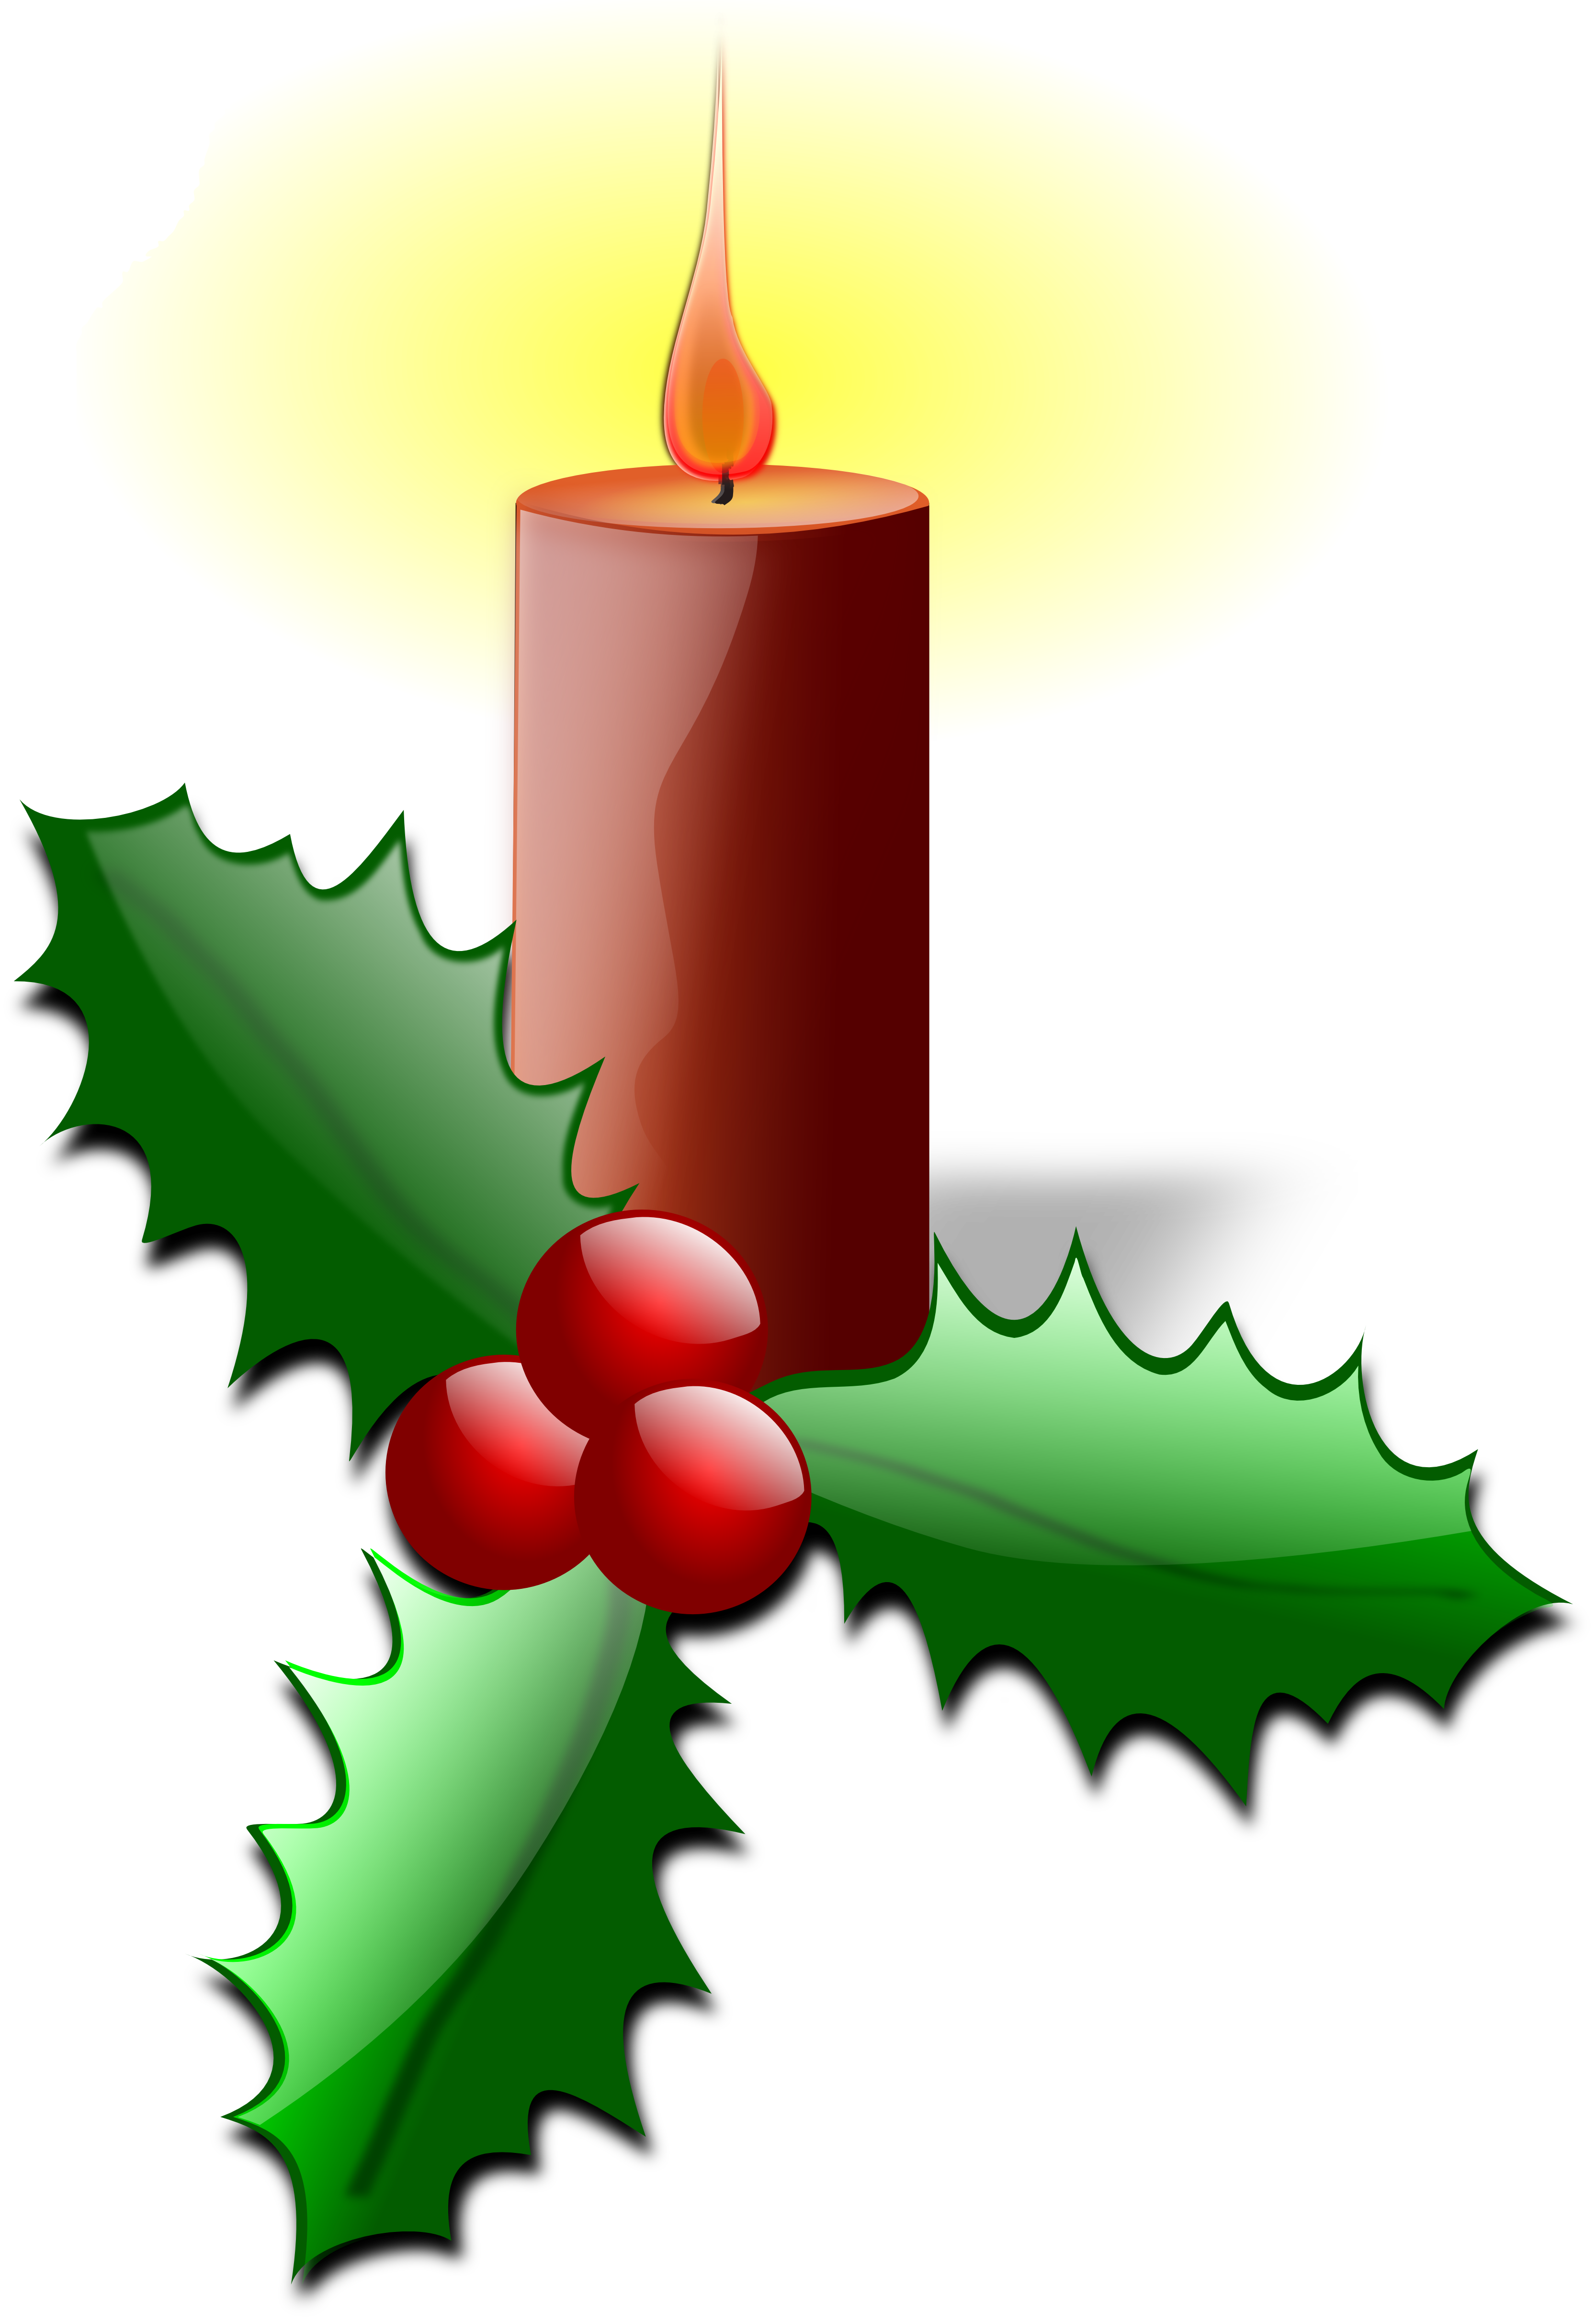 holly christmas 10 xmas holiday SVG - ClipArt Best - ClipArt Best